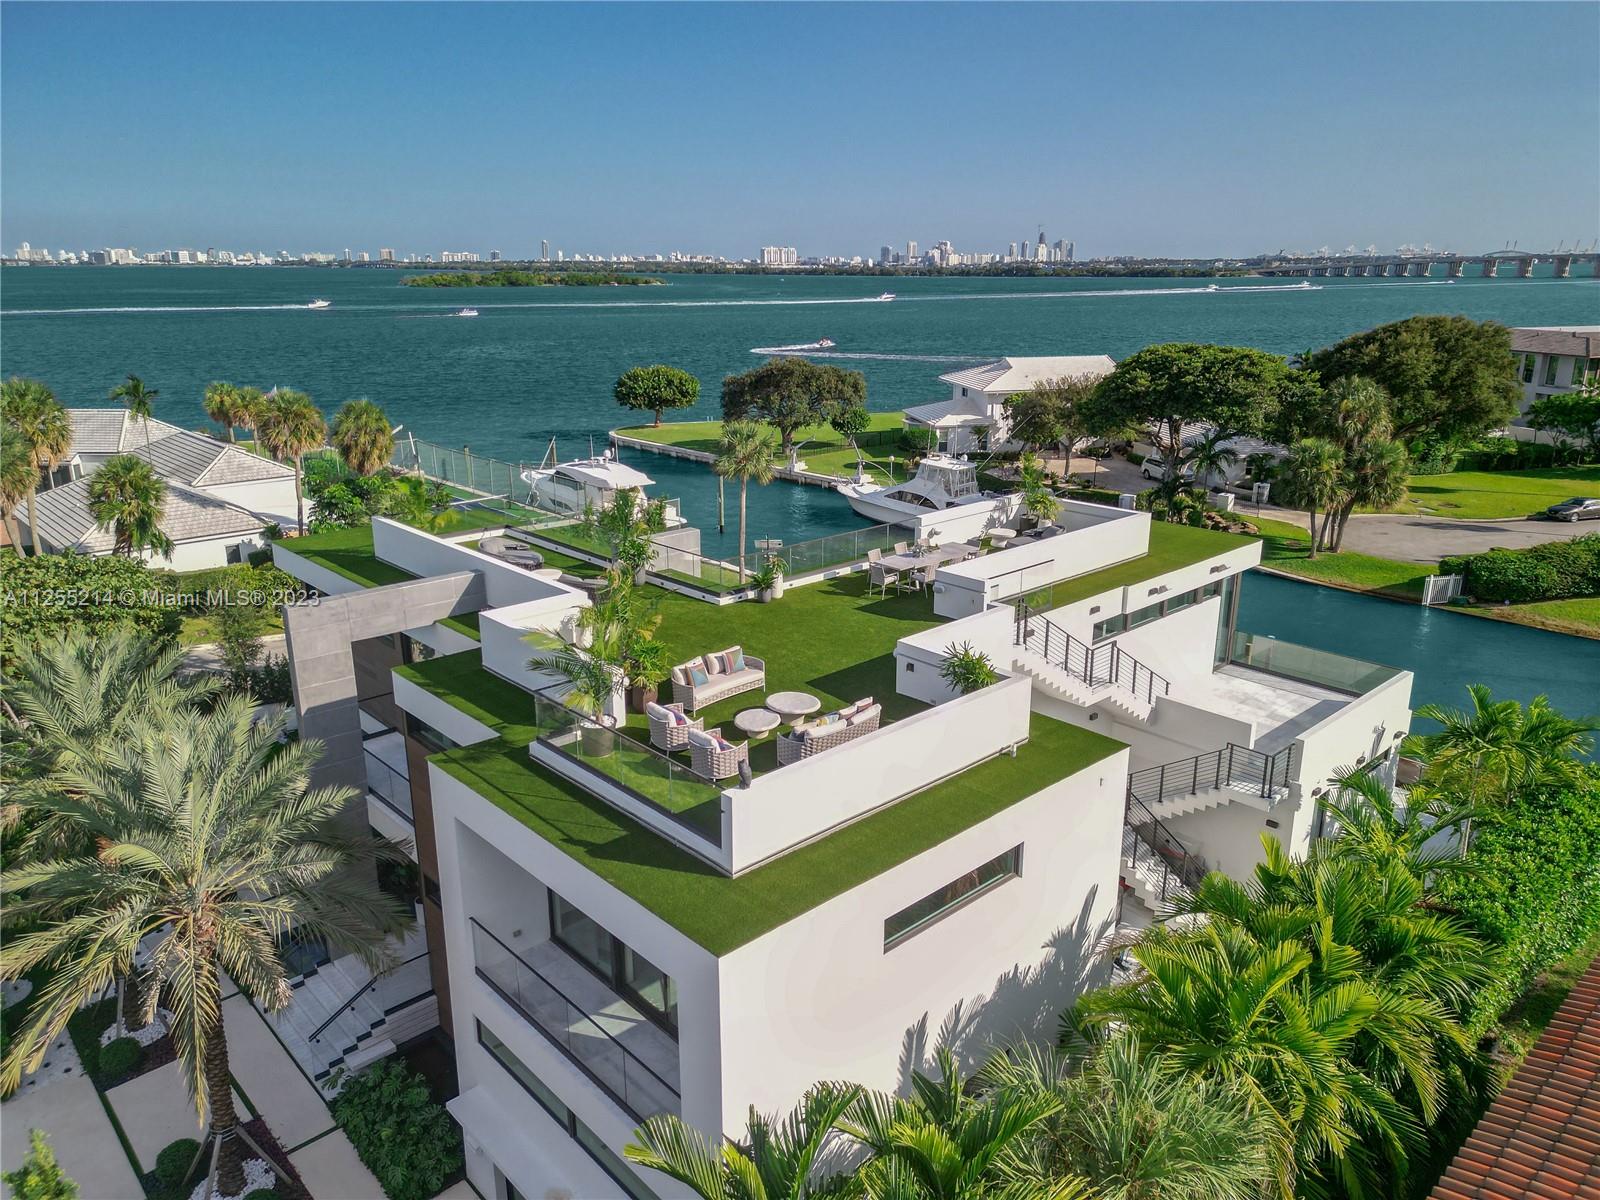 CASA MODERNE! This truly modern tropical waterfront masterpiece is privately located at the end of a cul-de-sac in Bay Point, Miami’s most secluded true gated community. This stunning new construction boasts the
only approved rooftop terrace in this exclusive community with breath-taking 360 degrees of unobstructed views of the bay & Miami's skyline. On its way to completion, this custom-built home has ultra-high-end finishes magnificently accentuated with natural stones, drop ceilings, floor-to-ceiling impact glass doors, floating staircase, Italian glass doors, state-of-the-art kitchen, see-through wine cellar, fireplace, elevator and lapping pool. All suite bedrooms with balconies and panoramic views. Ideal for those who like to entertain & experience the best.
lifestyle in Miami